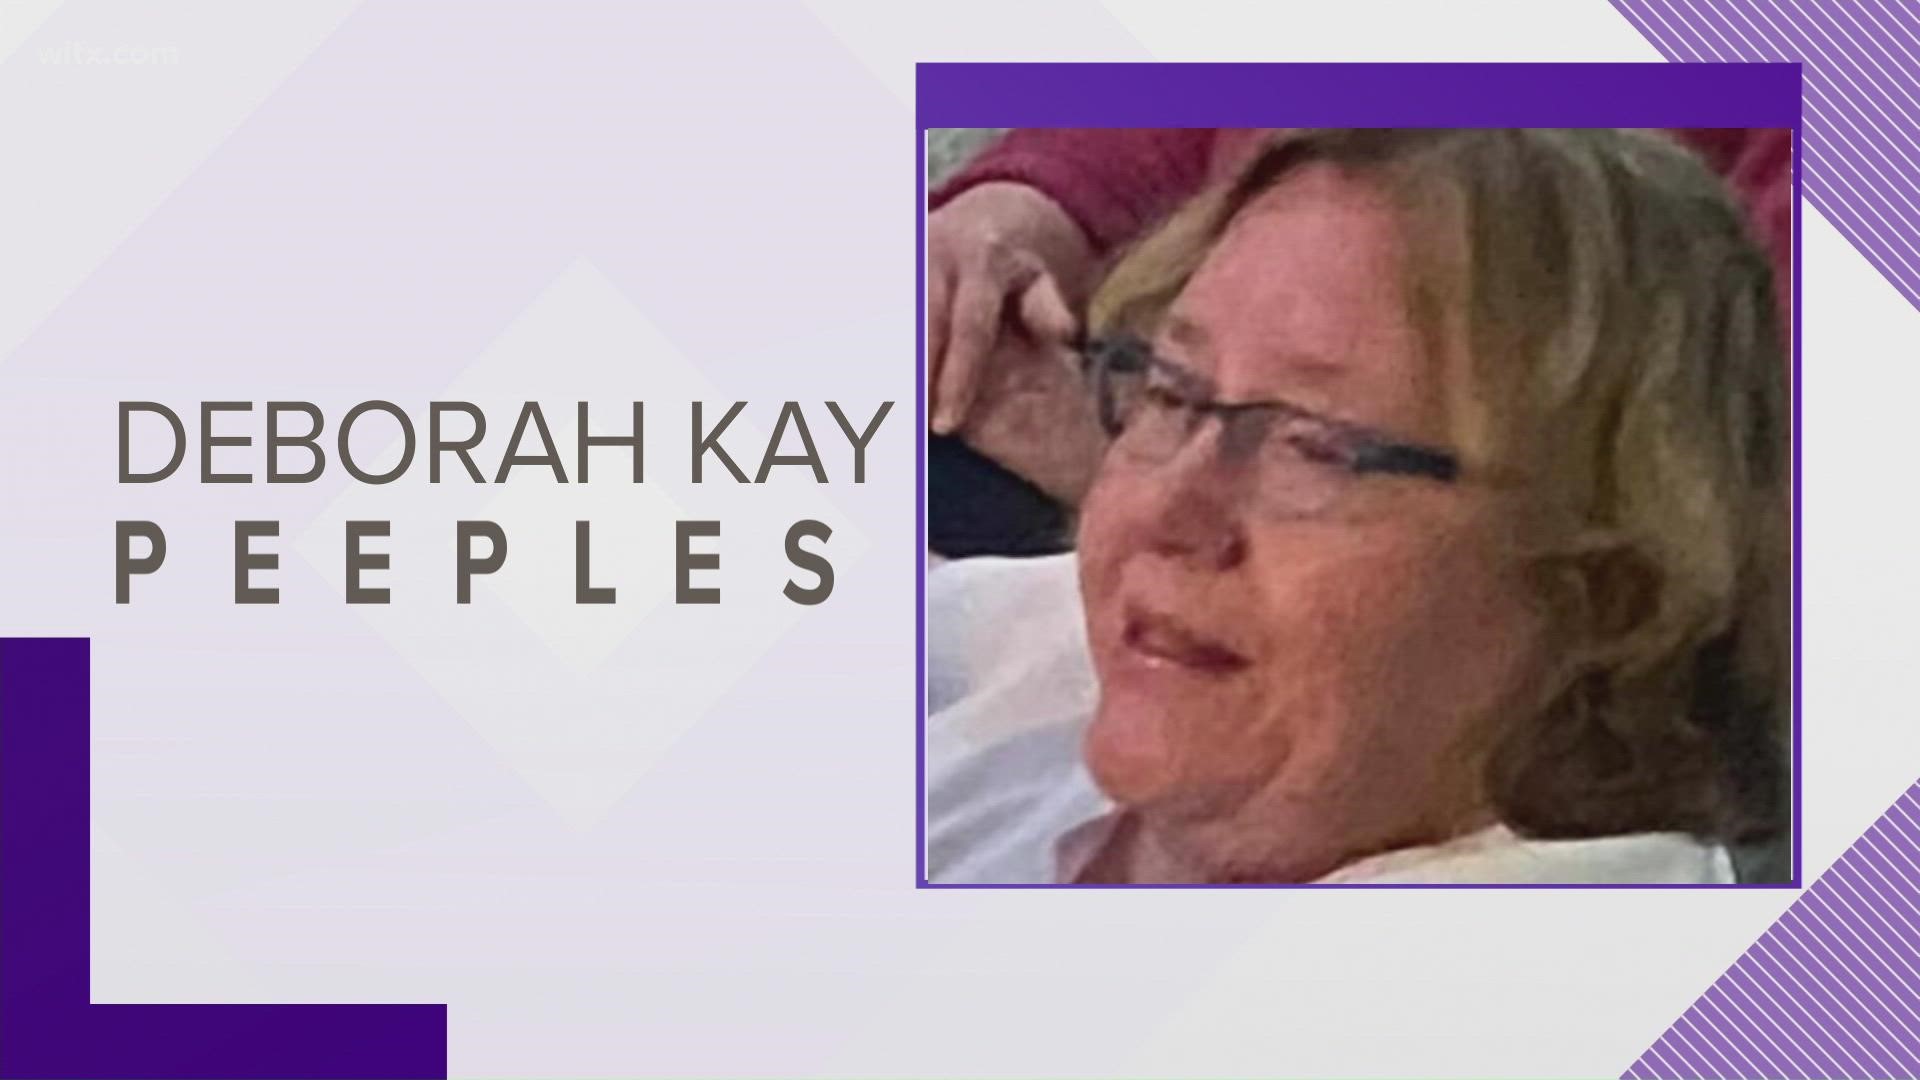 Authorities said that Deborah Kay Peeples was last seen in the area of Higher Ground outside of Chapin on Saturday night.